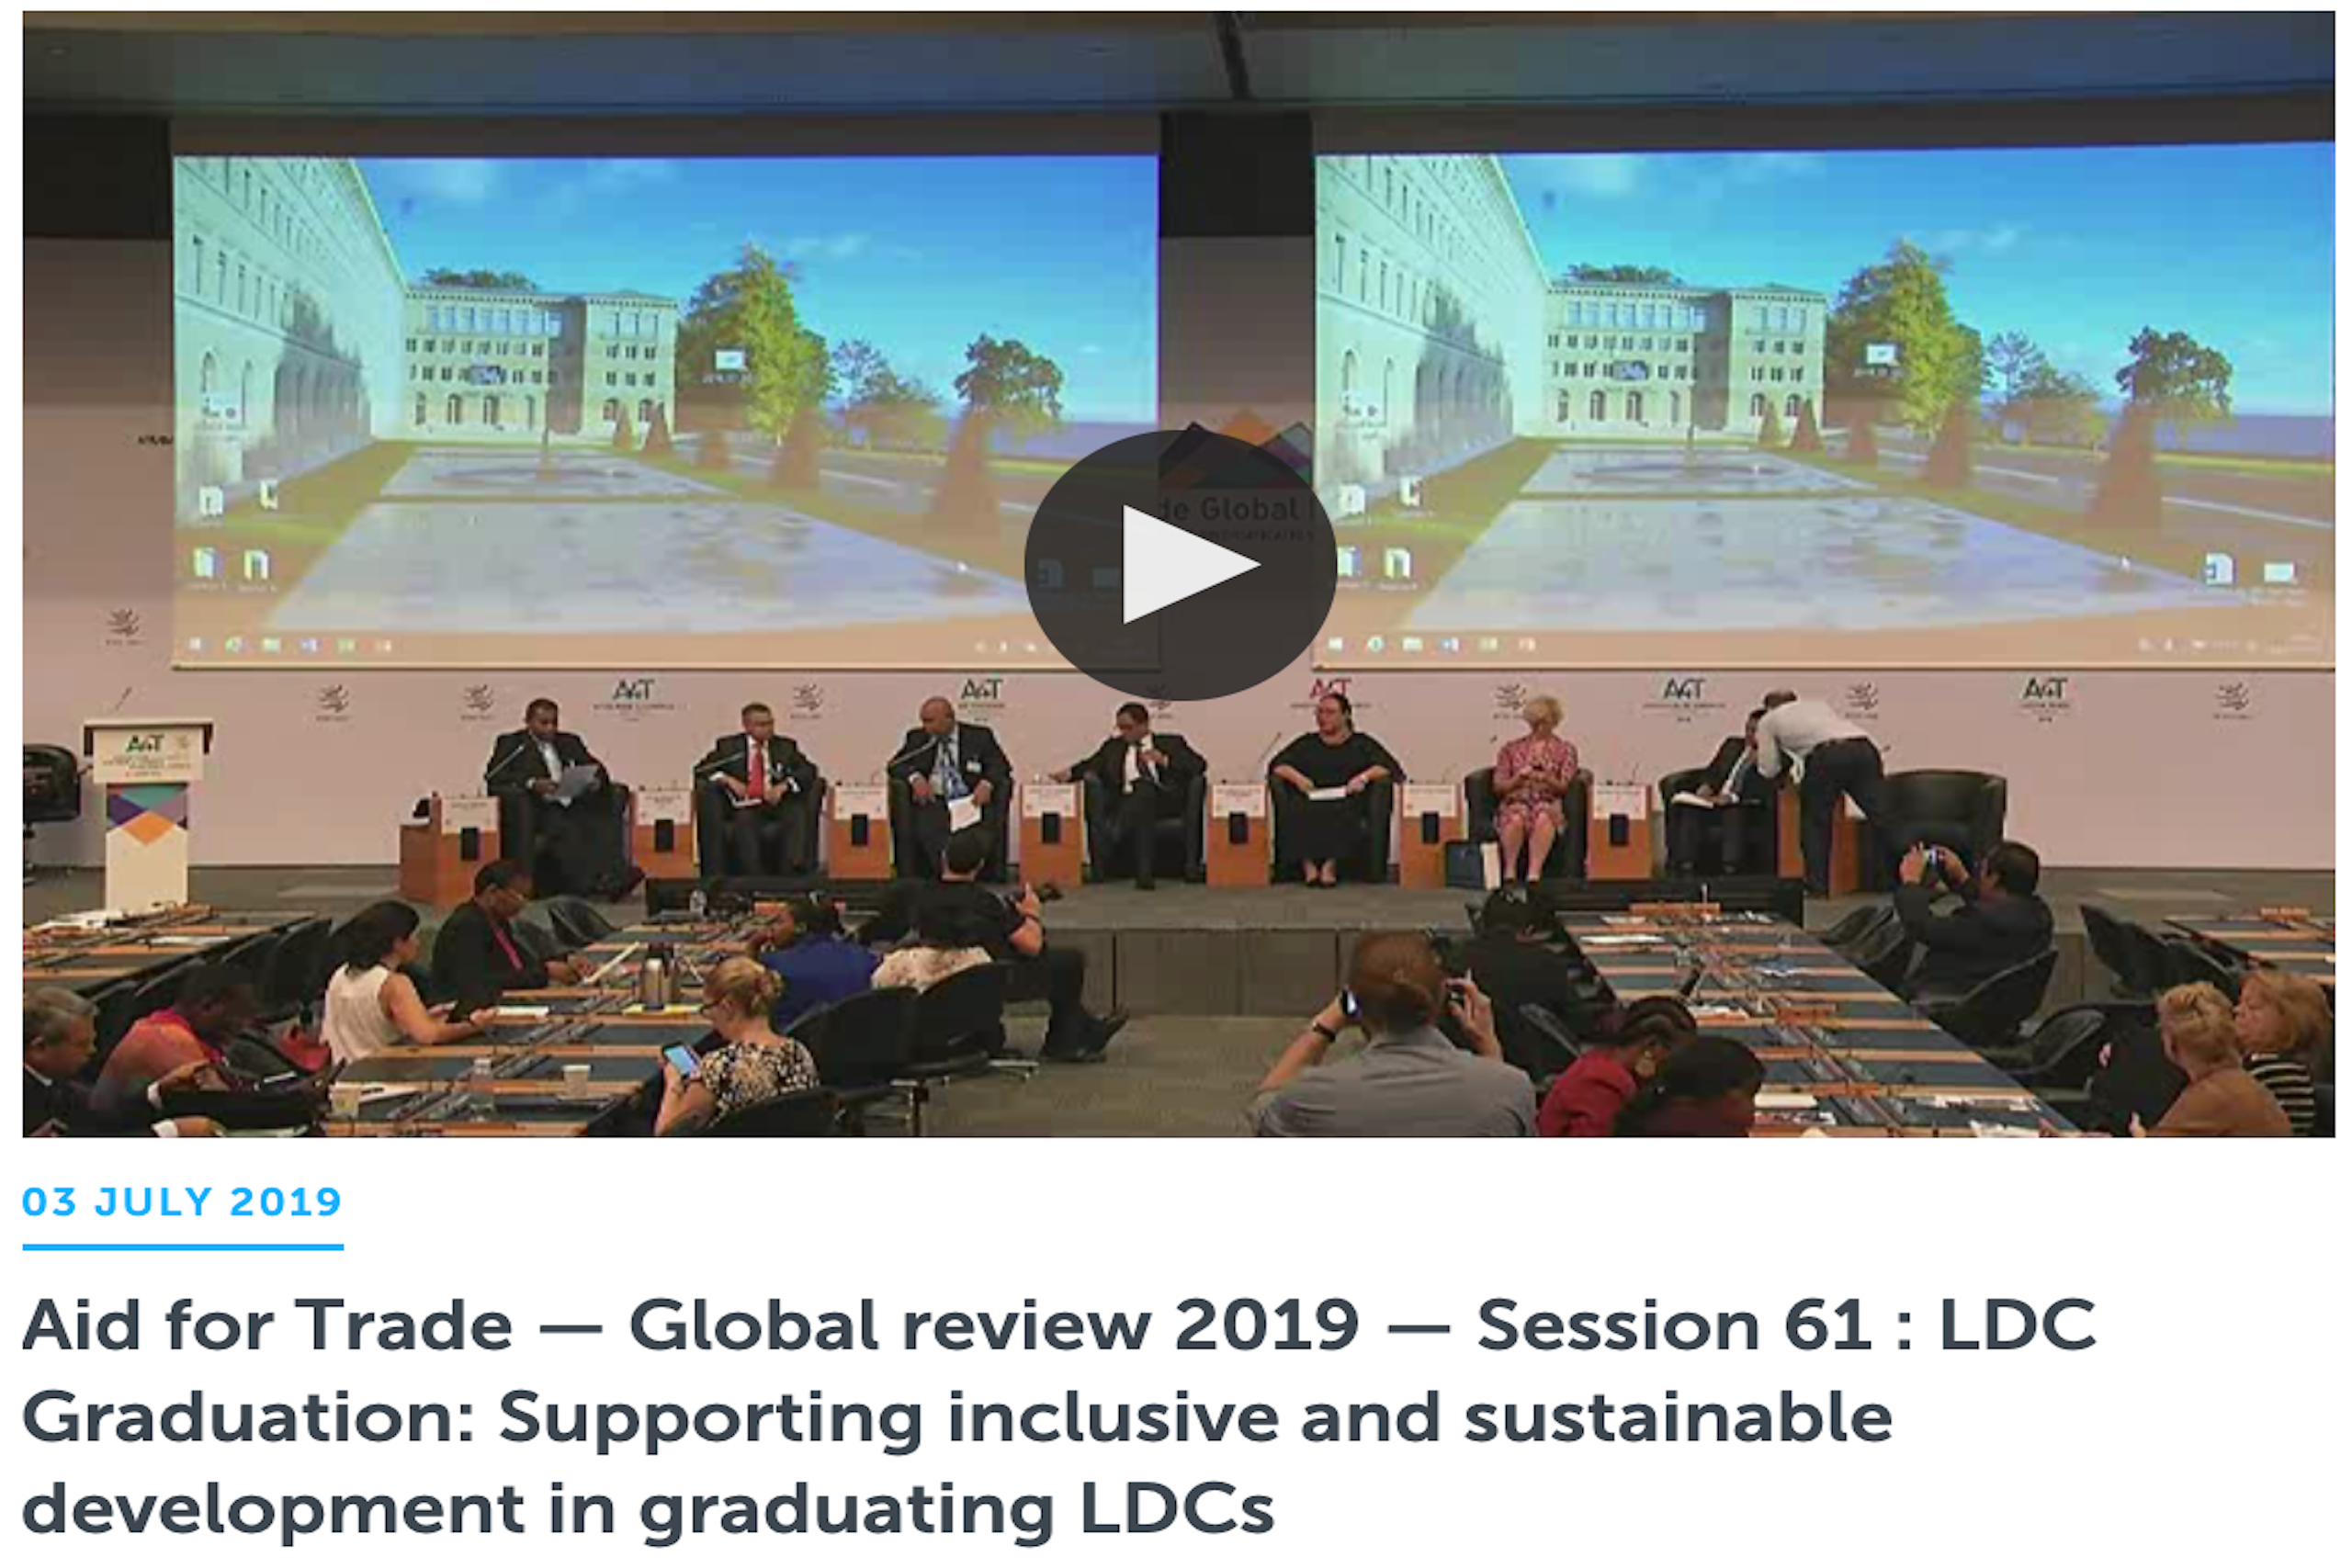 The Aid for Trade Global Review 2019: Session 61 focused on LDC graduation